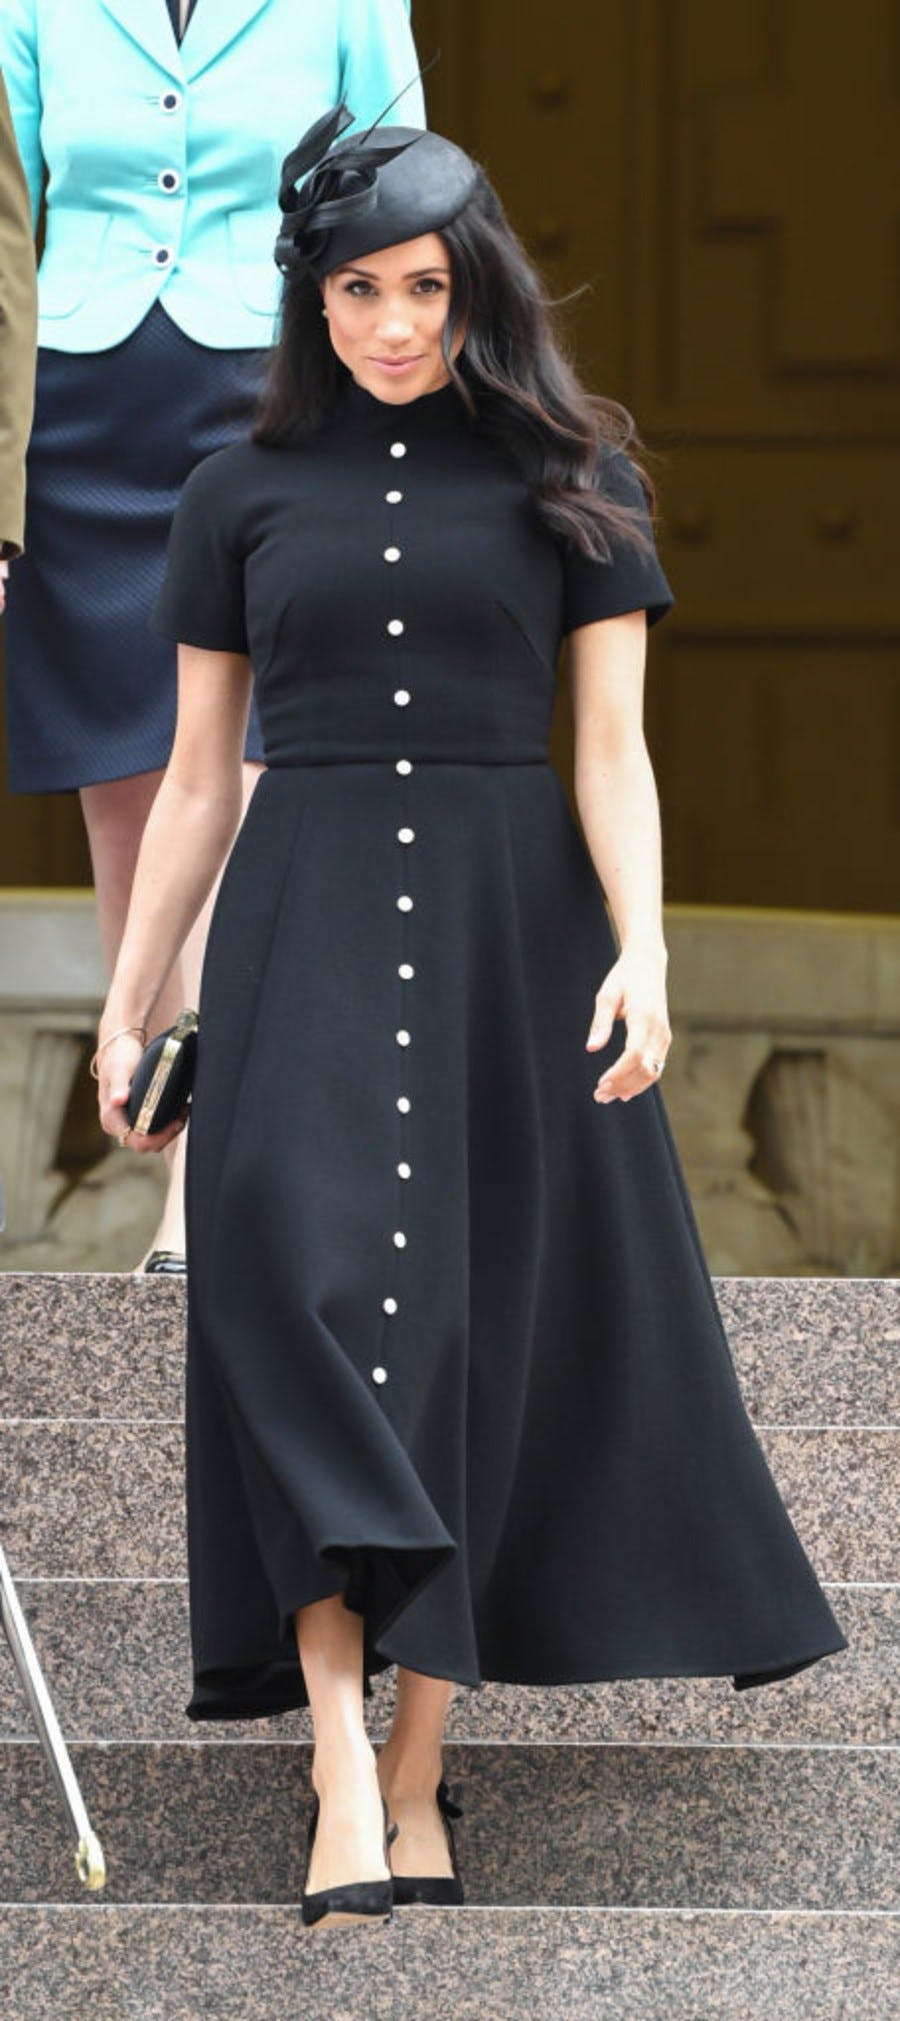 The 7 fashion lessons we learned from Meghan Markle’s first royal tour